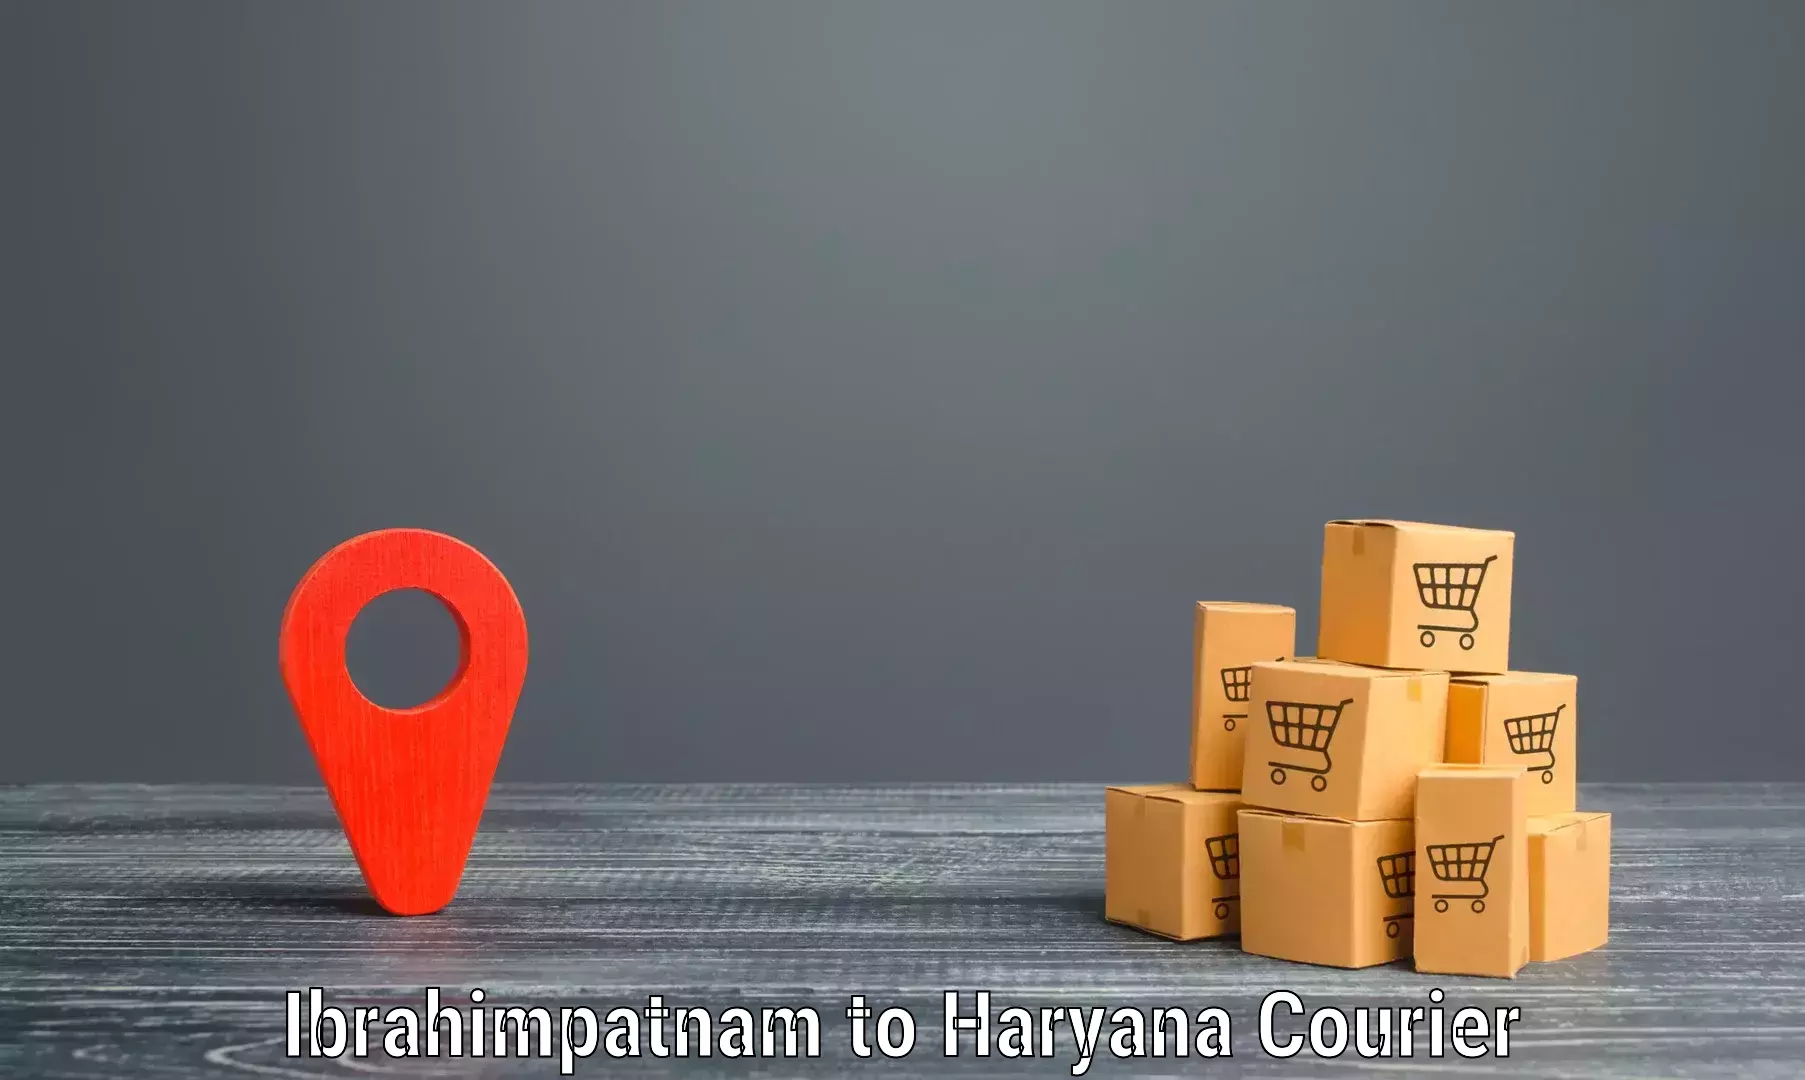 Professional delivery solutions in Ibrahimpatnam to NCR Haryana